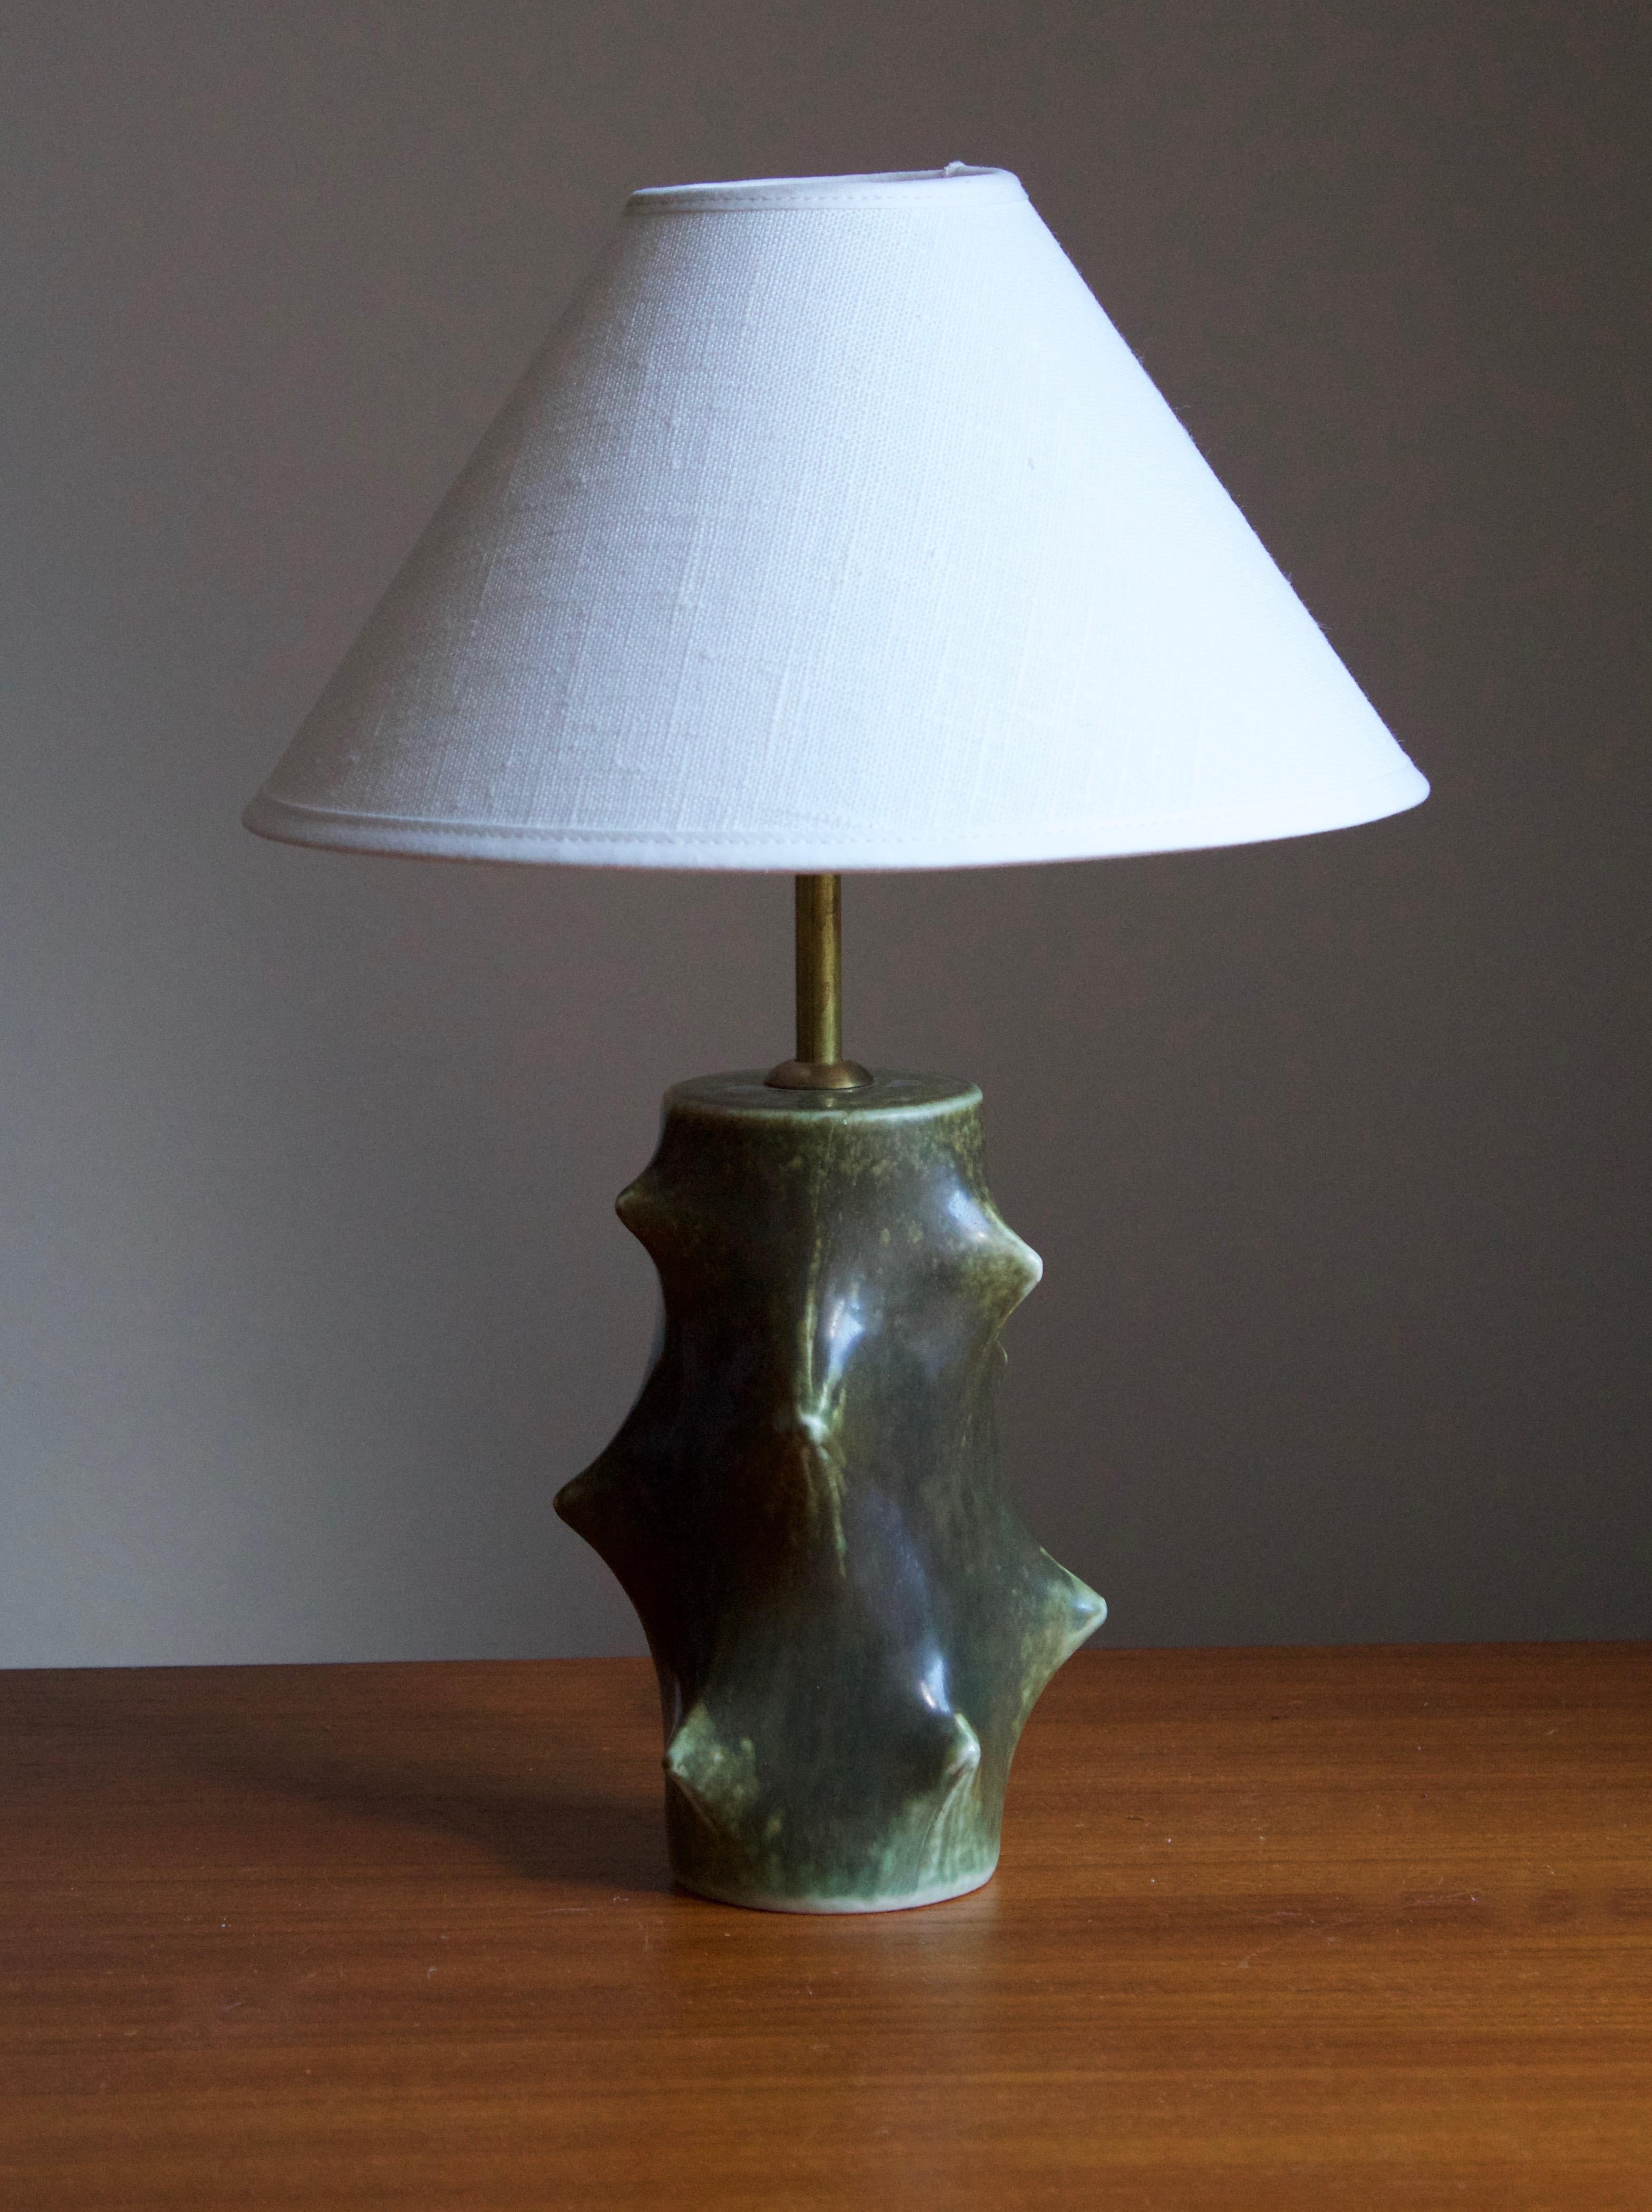 A small organic table / desk lamp designed by Danish ceramicist Knud Basse, produced by Michael Andersen, Denmark in partnership danish lamp manufacturer Lyfa. 

Stated dimensions exclude lampshade, height include socket. Sold without